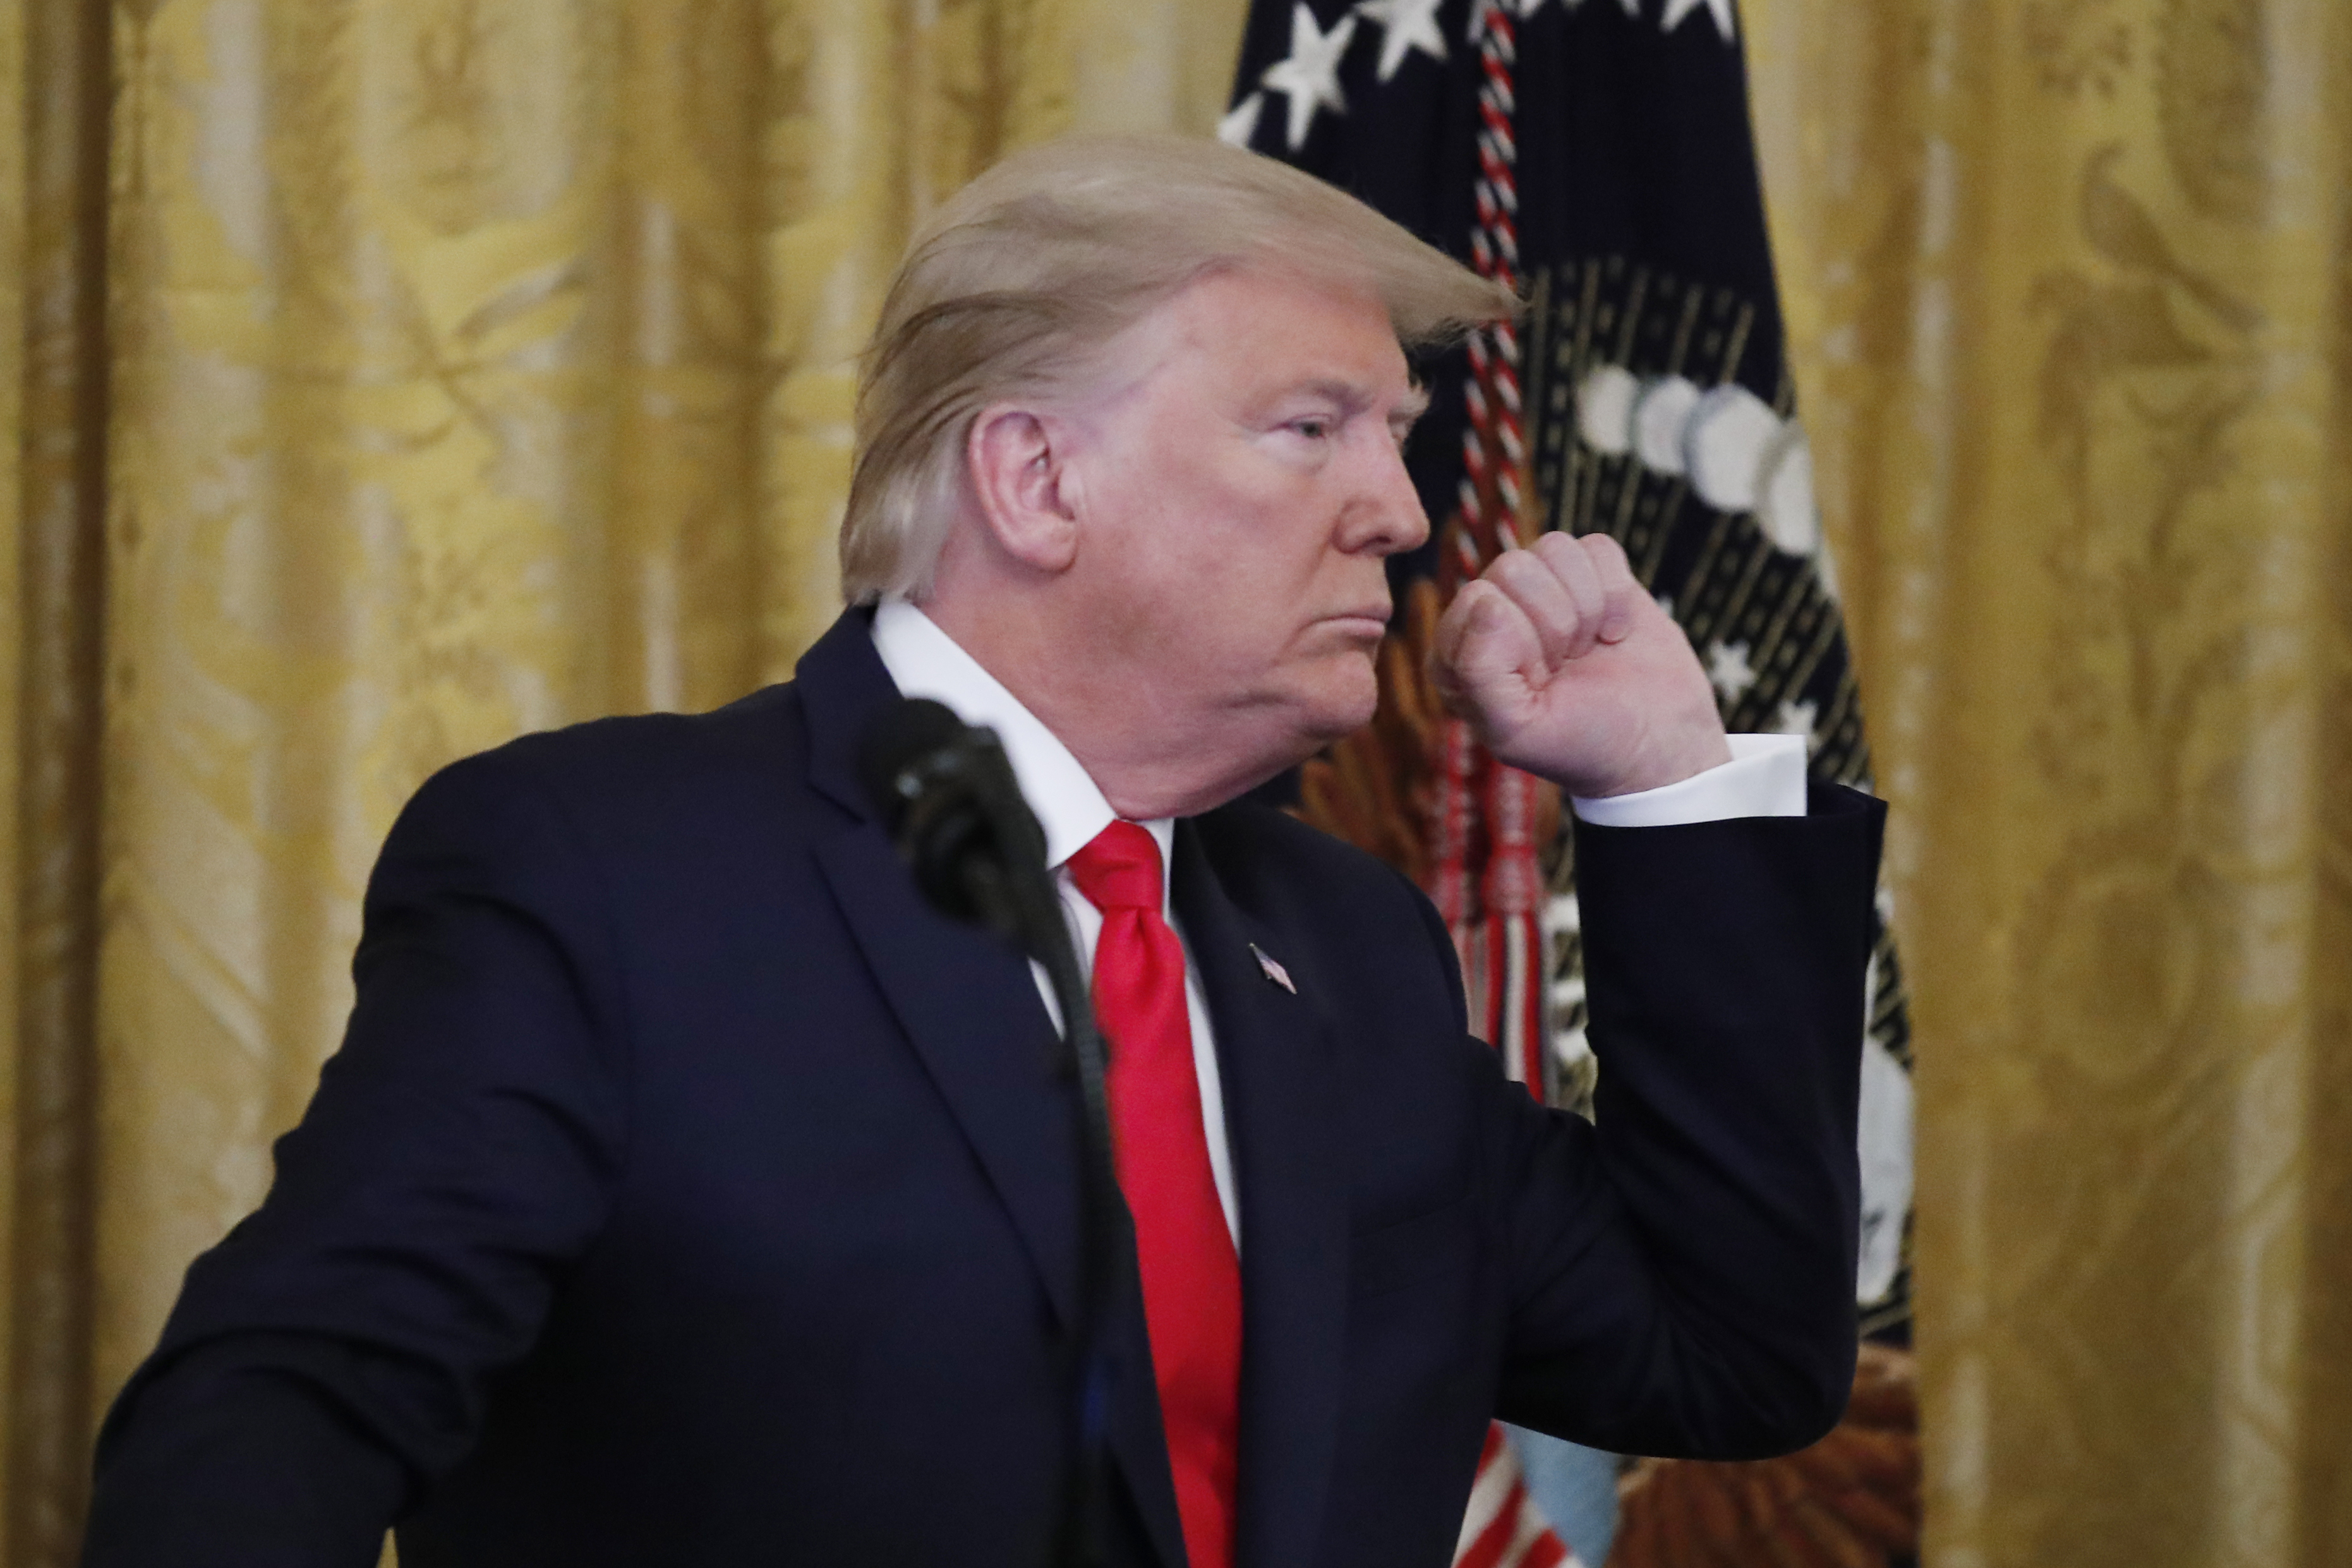 President Donald Trump gestures as he speaks during an event with Israeli Prime Minister Benjamin Netanyahu in the East Room of the White House in Washington, Tuesday, Jan. 28, 2020, to announce the Trump administration's much-anticipated plan to resolve the Israeli-Palestinian conflict. (AP Photo/Alex Brandon)